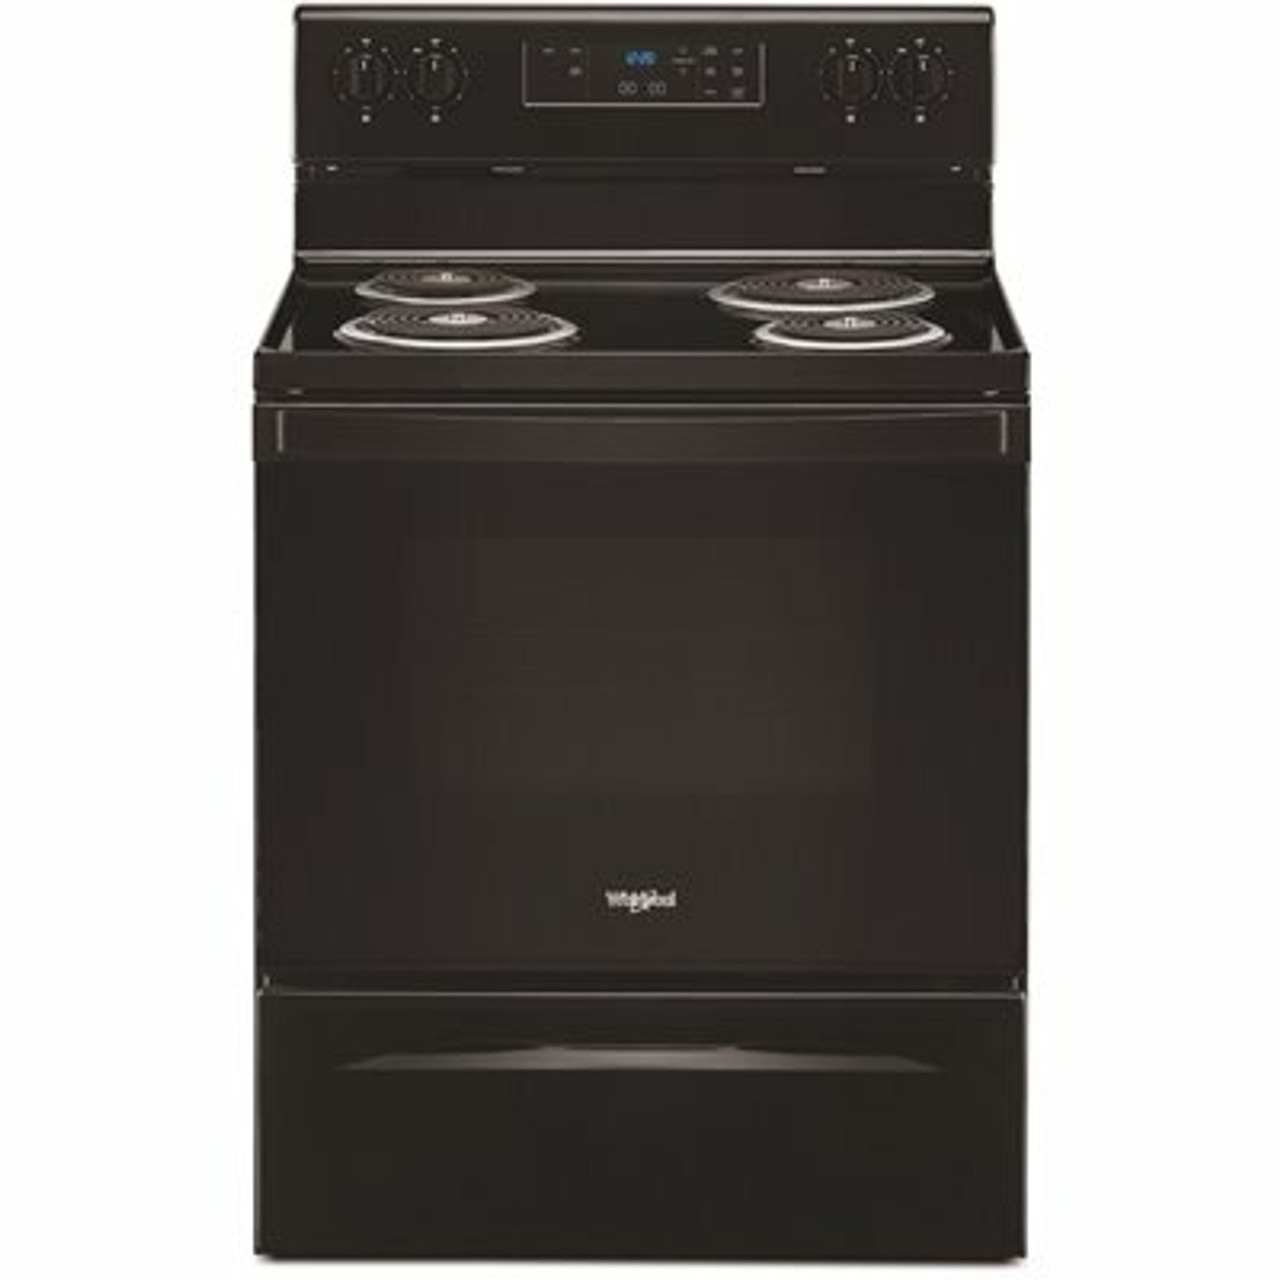 Whirlpool 30 In. 4.8 Cu. Ft. 4-Burner Electric Range With Keep Warm Setting In Black With Storage Drawer